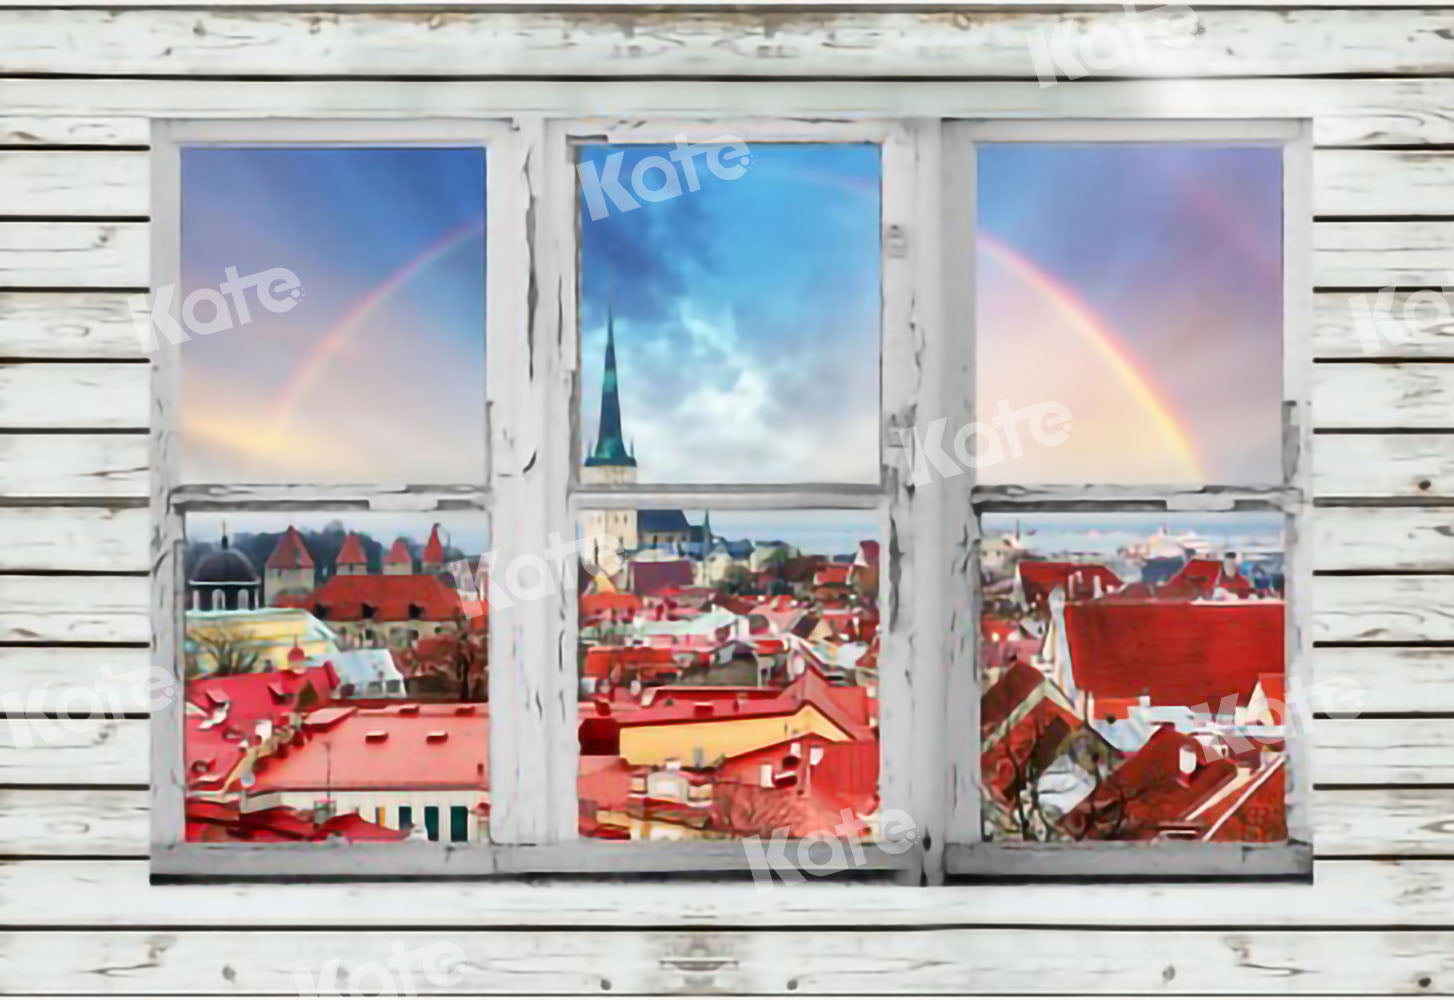 Kate Fall Rainbow Window Background for Photography Designed by Chain Photography